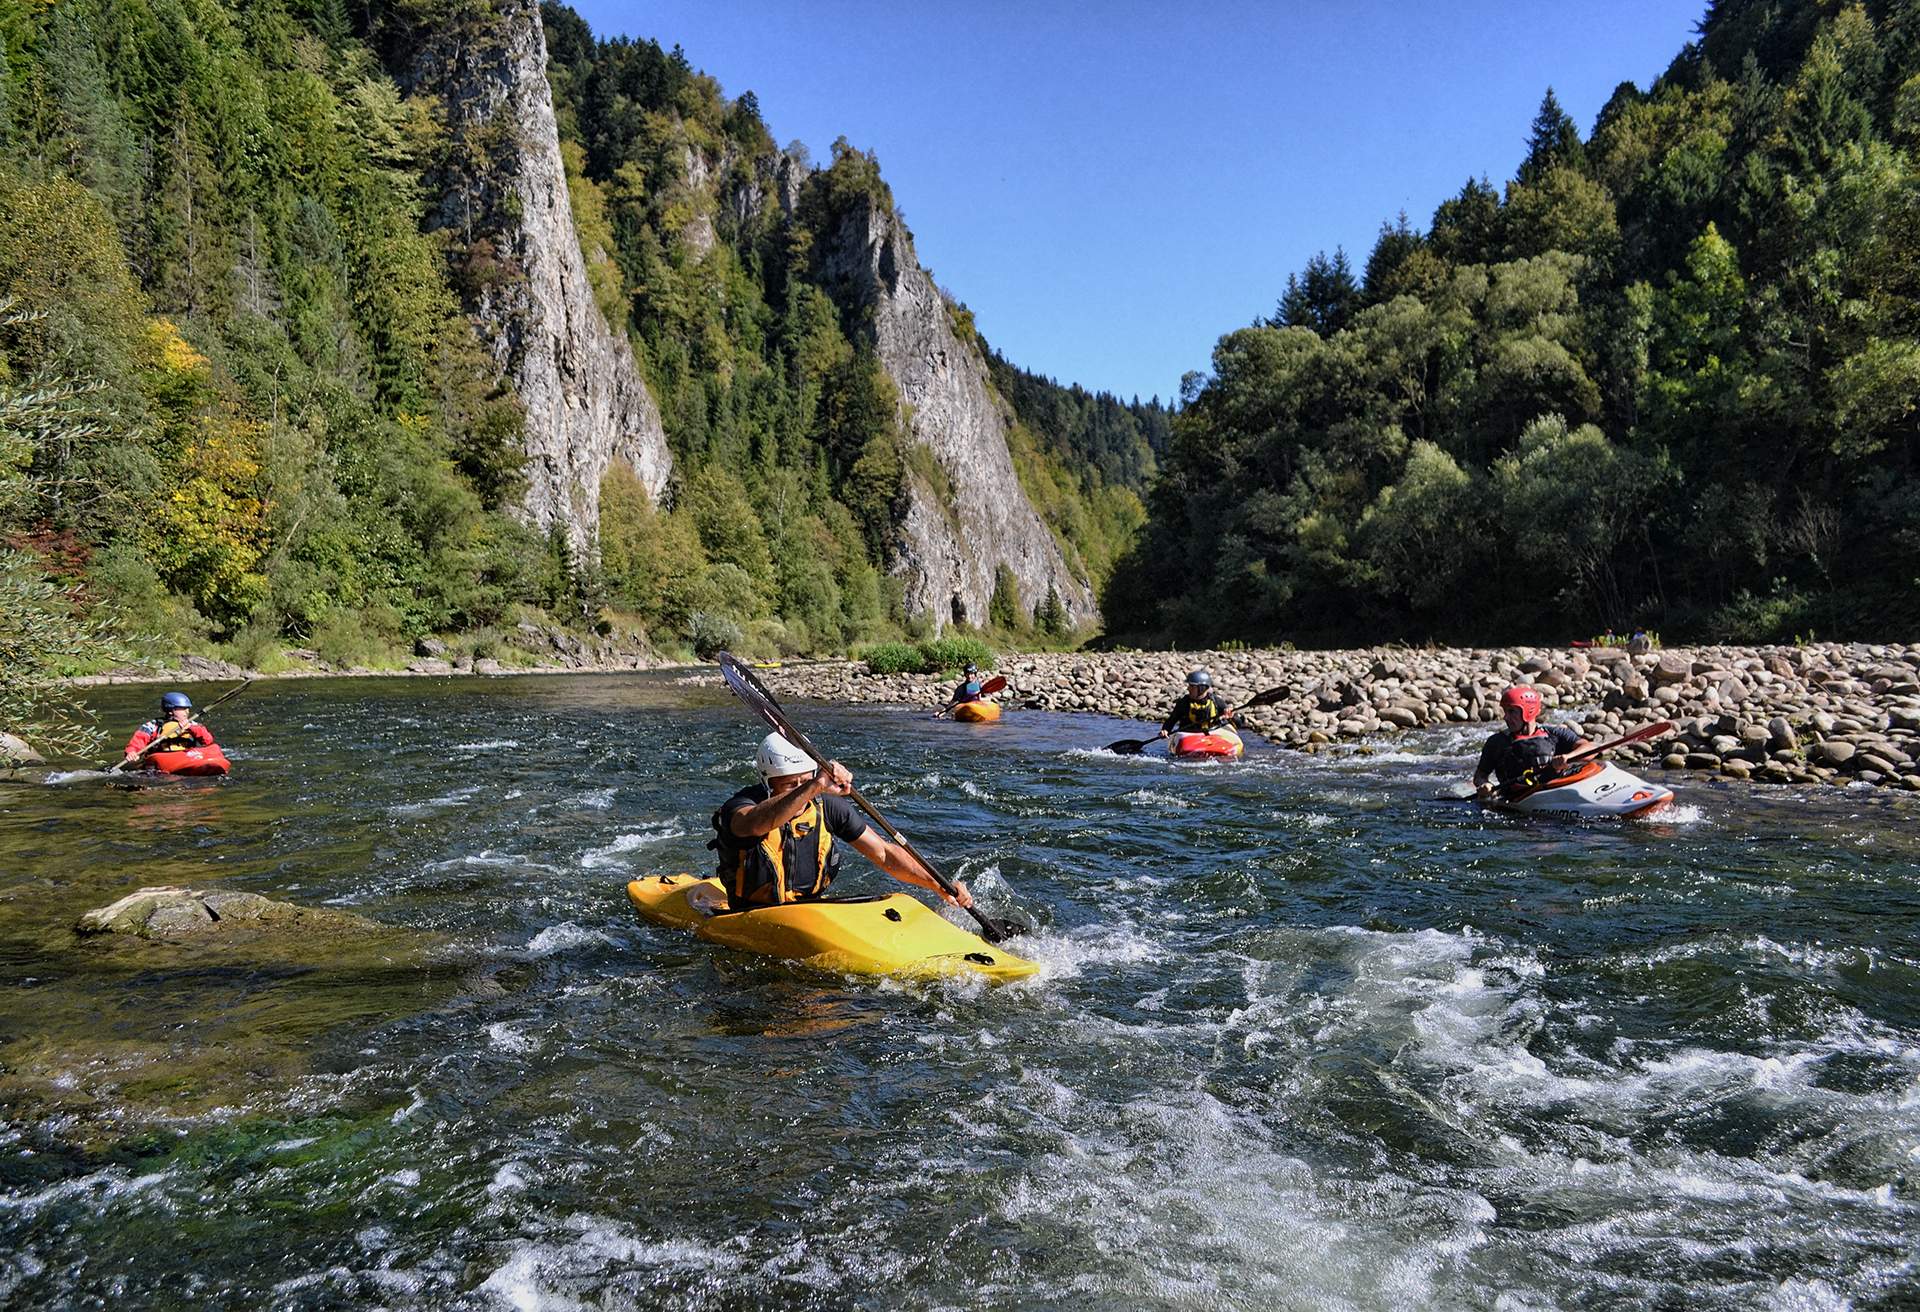 View of people rafting over a river gorge, Poland